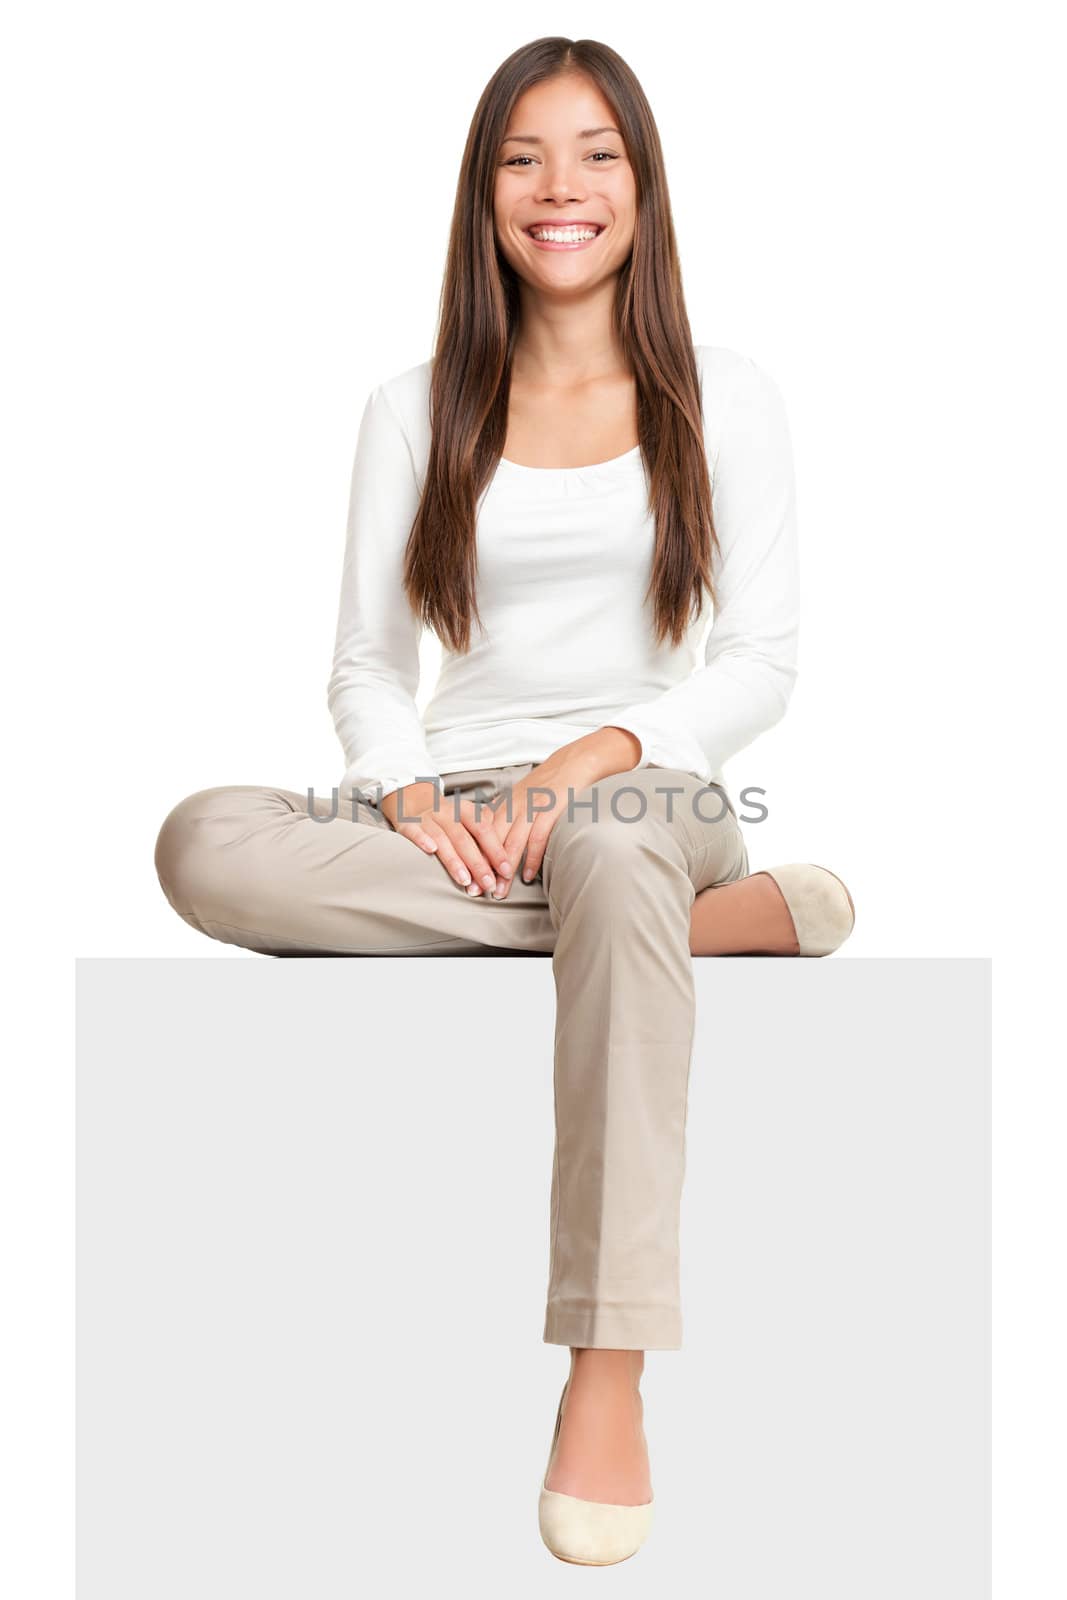 Sign people. Woman sitting on blank billboard placard sign. Casual young beautiful multiracial Asian isolated on white background.